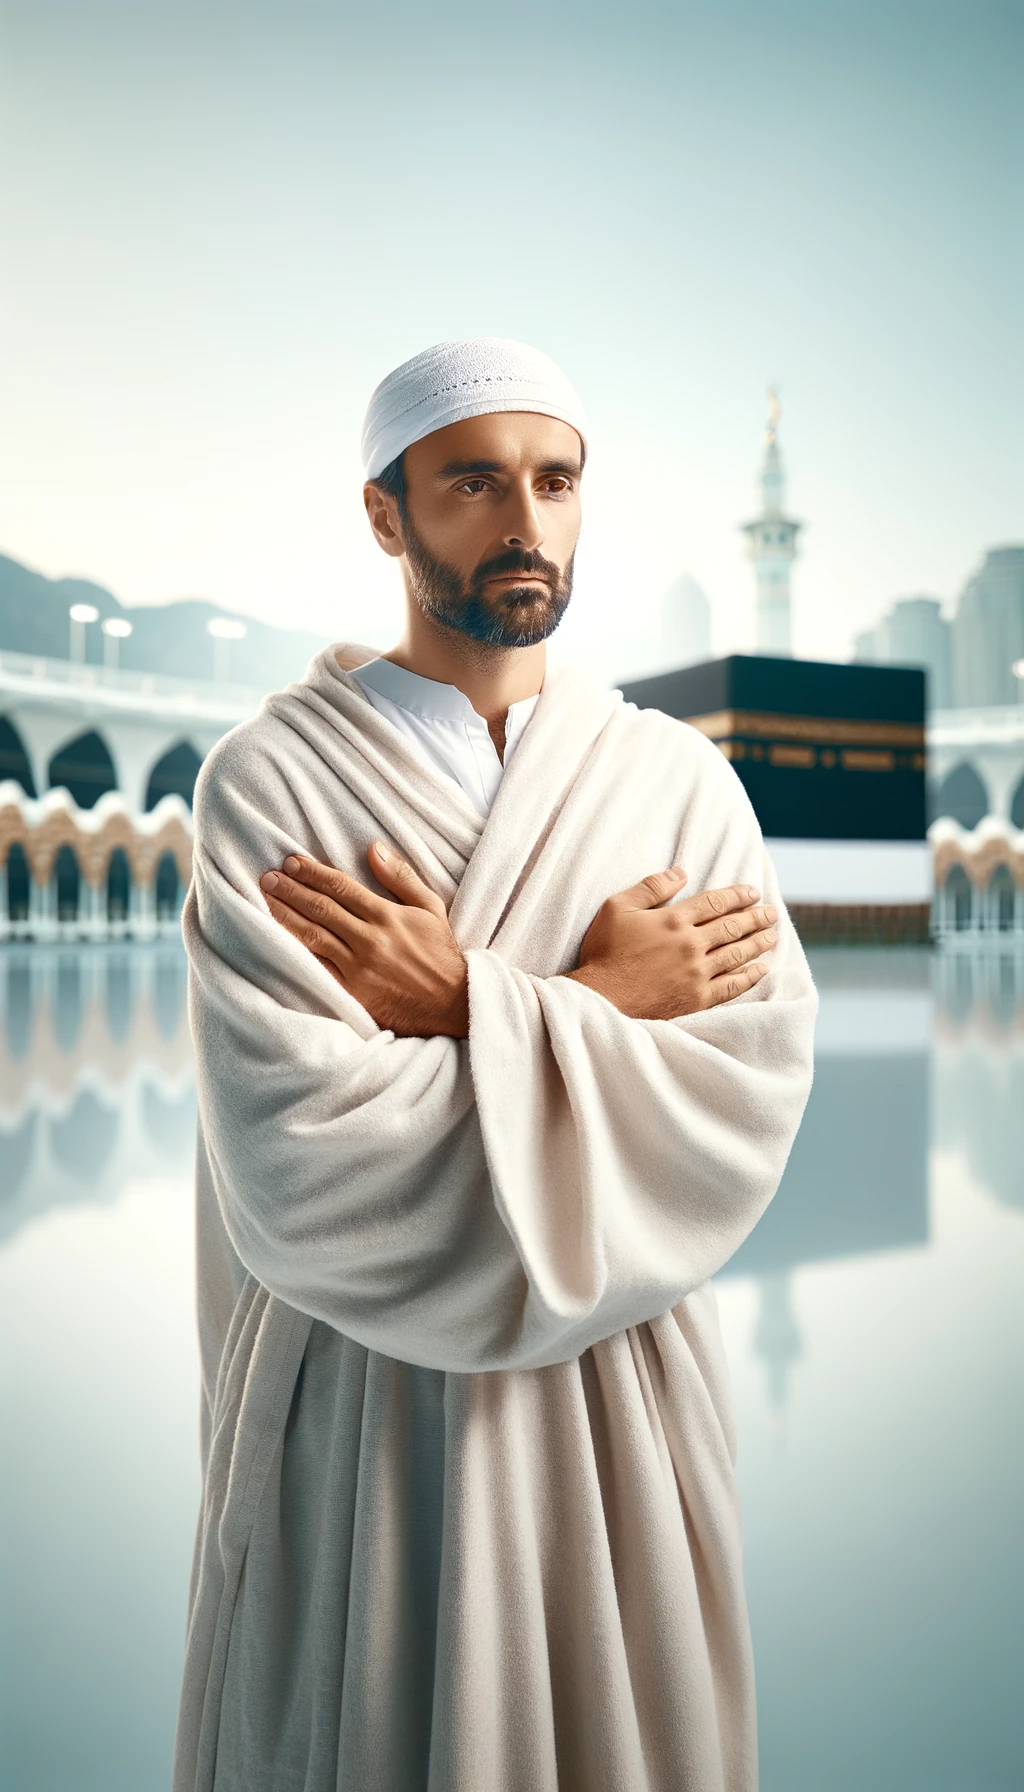 The Significance of Ihram Islamic Clothing in the UK